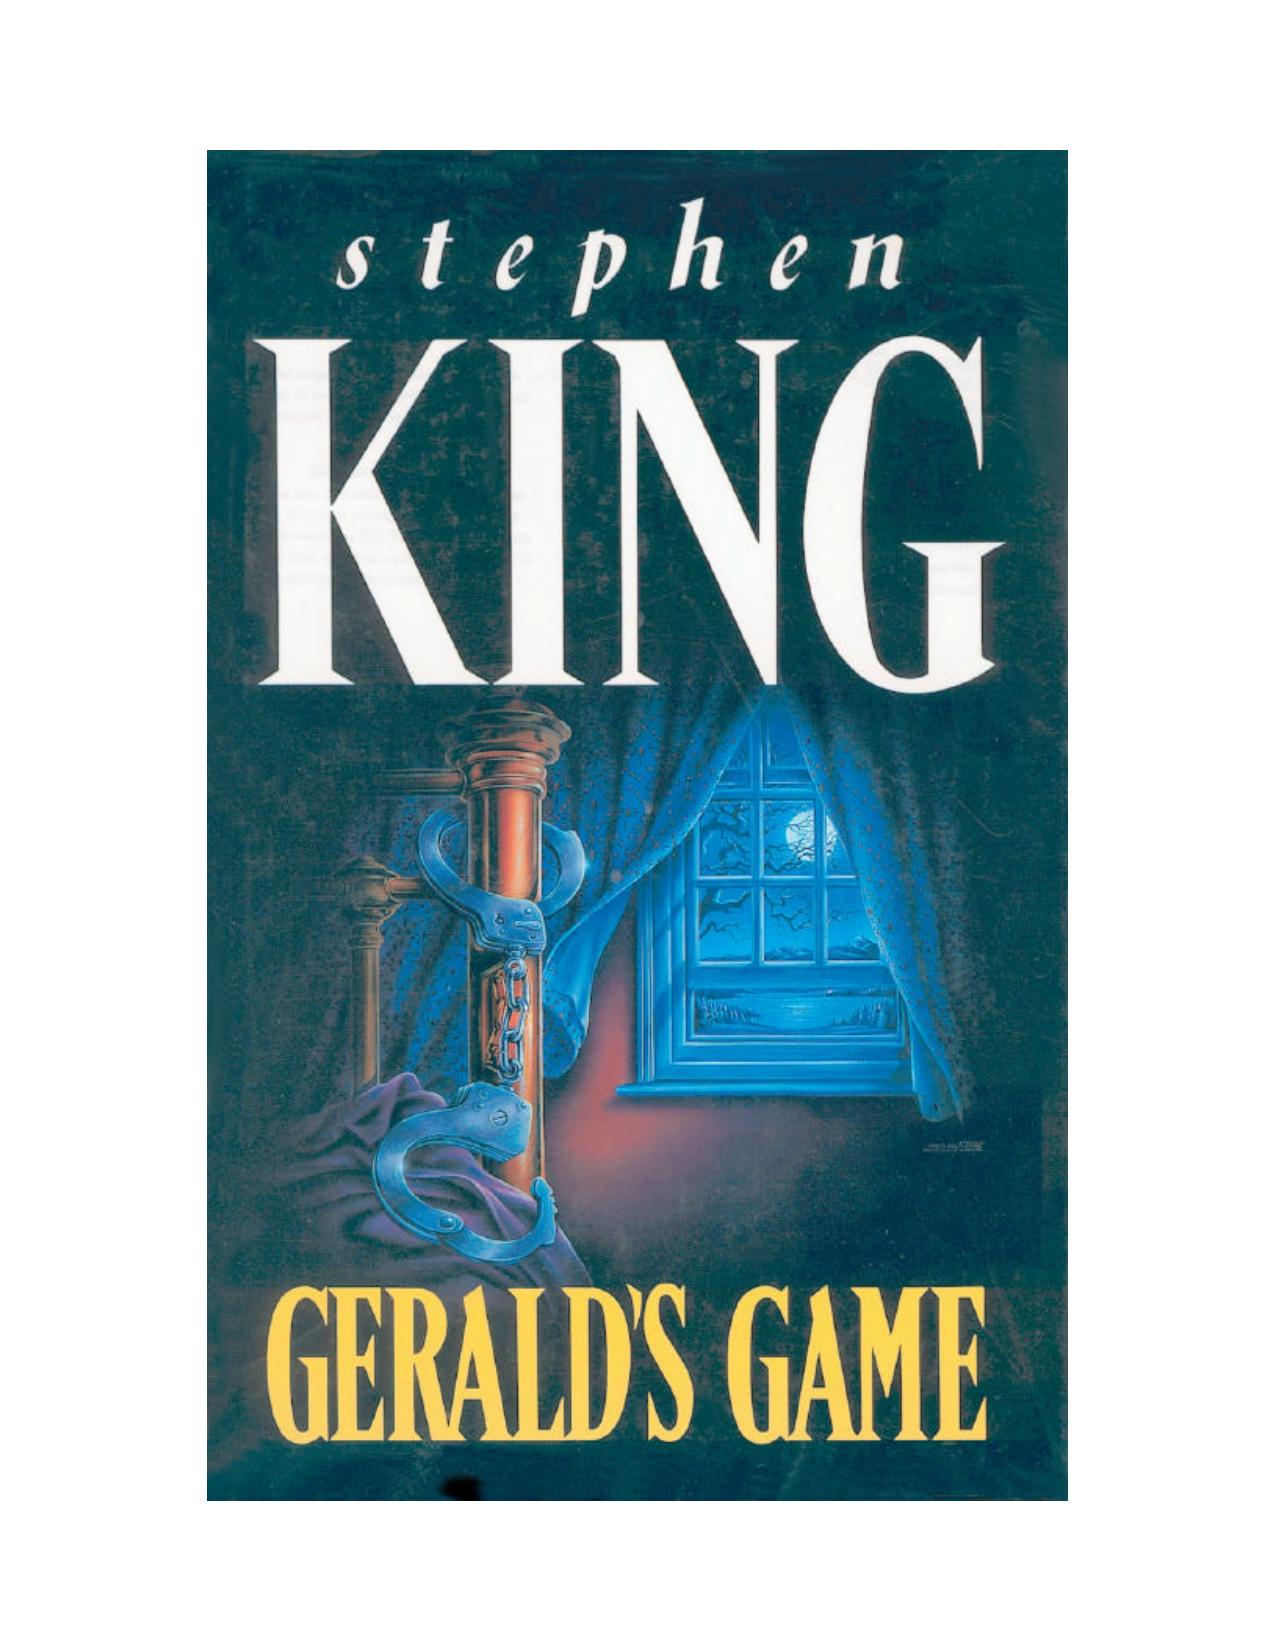 Gerald's Game by Stephen King